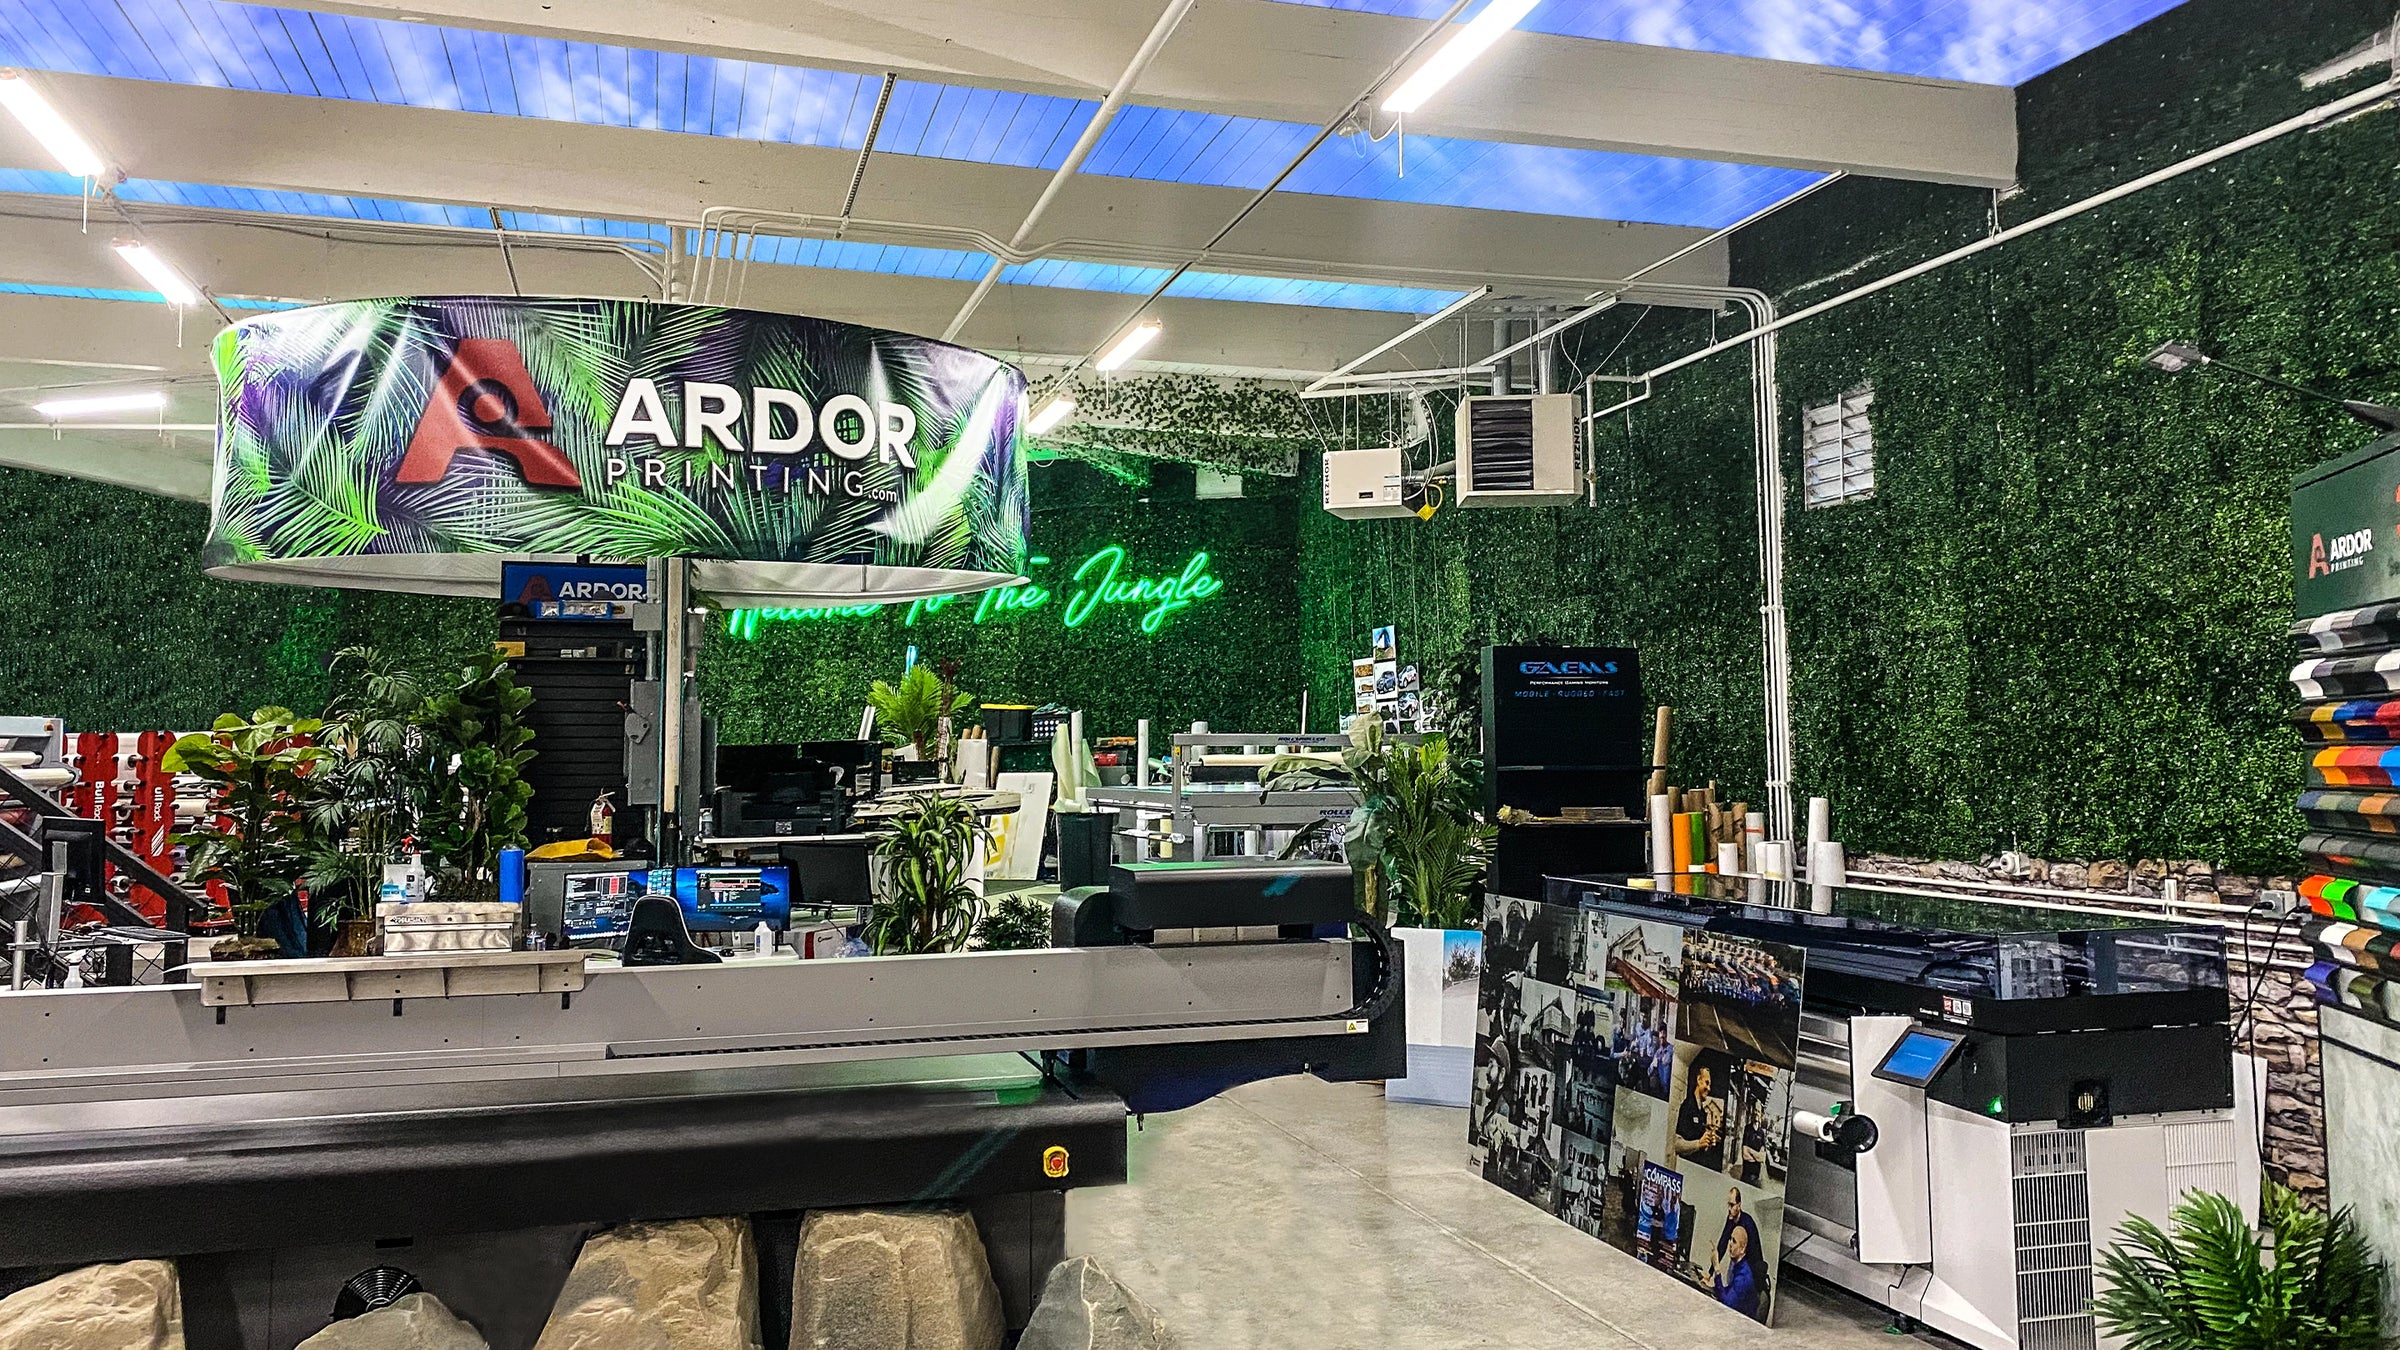 Ardor Printing the best place to get your signs, vehicle graphics, car wraps in the Seattle Area. This is the Ardor Printing Print Jungle.